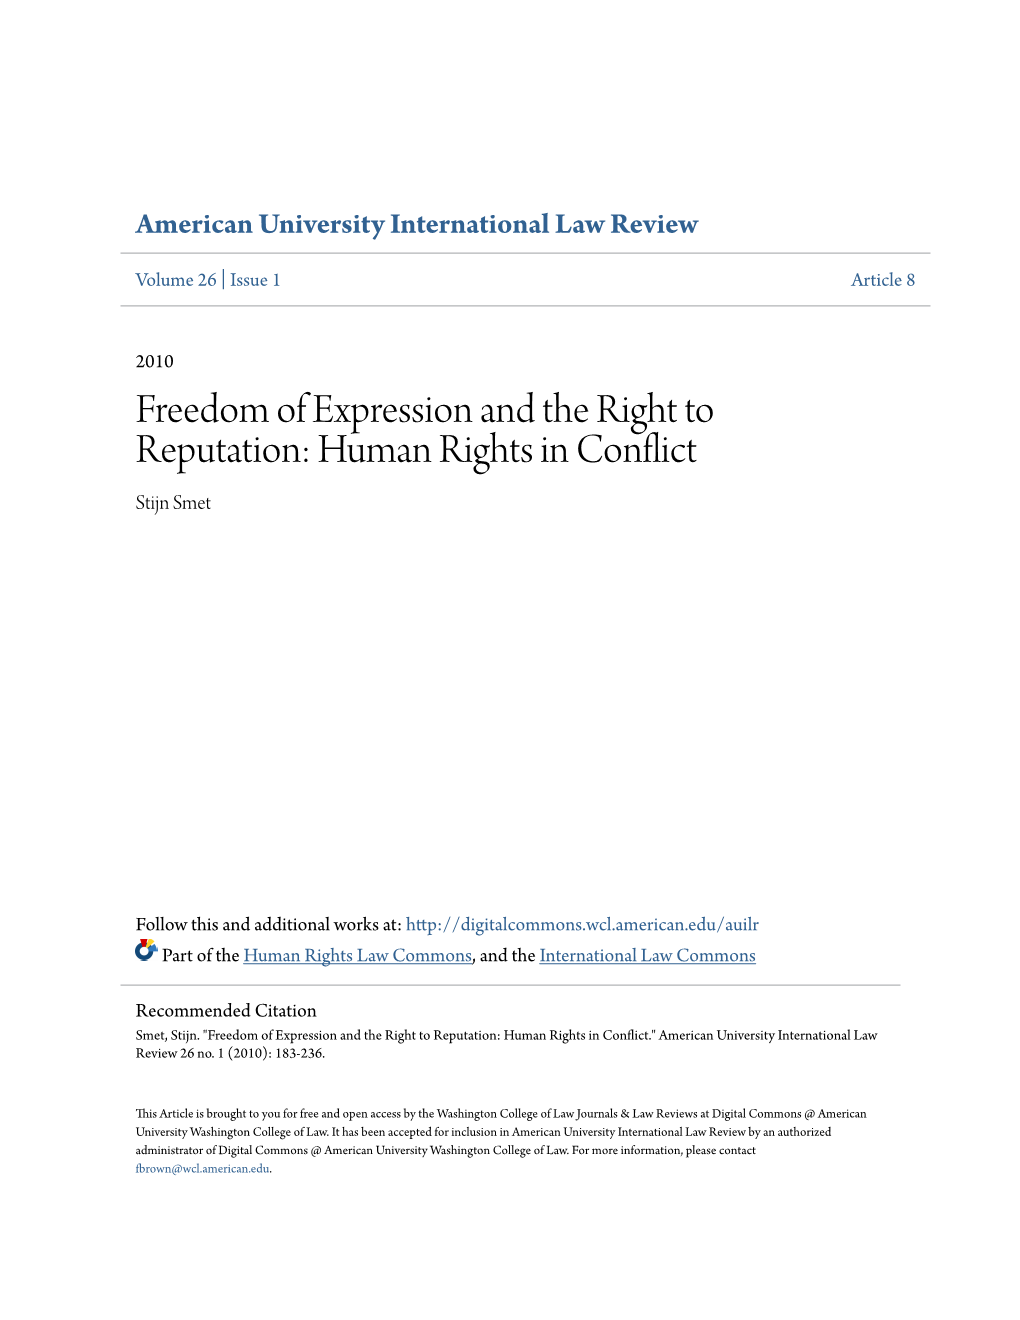 Freedom of Expression and the Right to Reputation: Human Rights in Conflict Stijn Smet